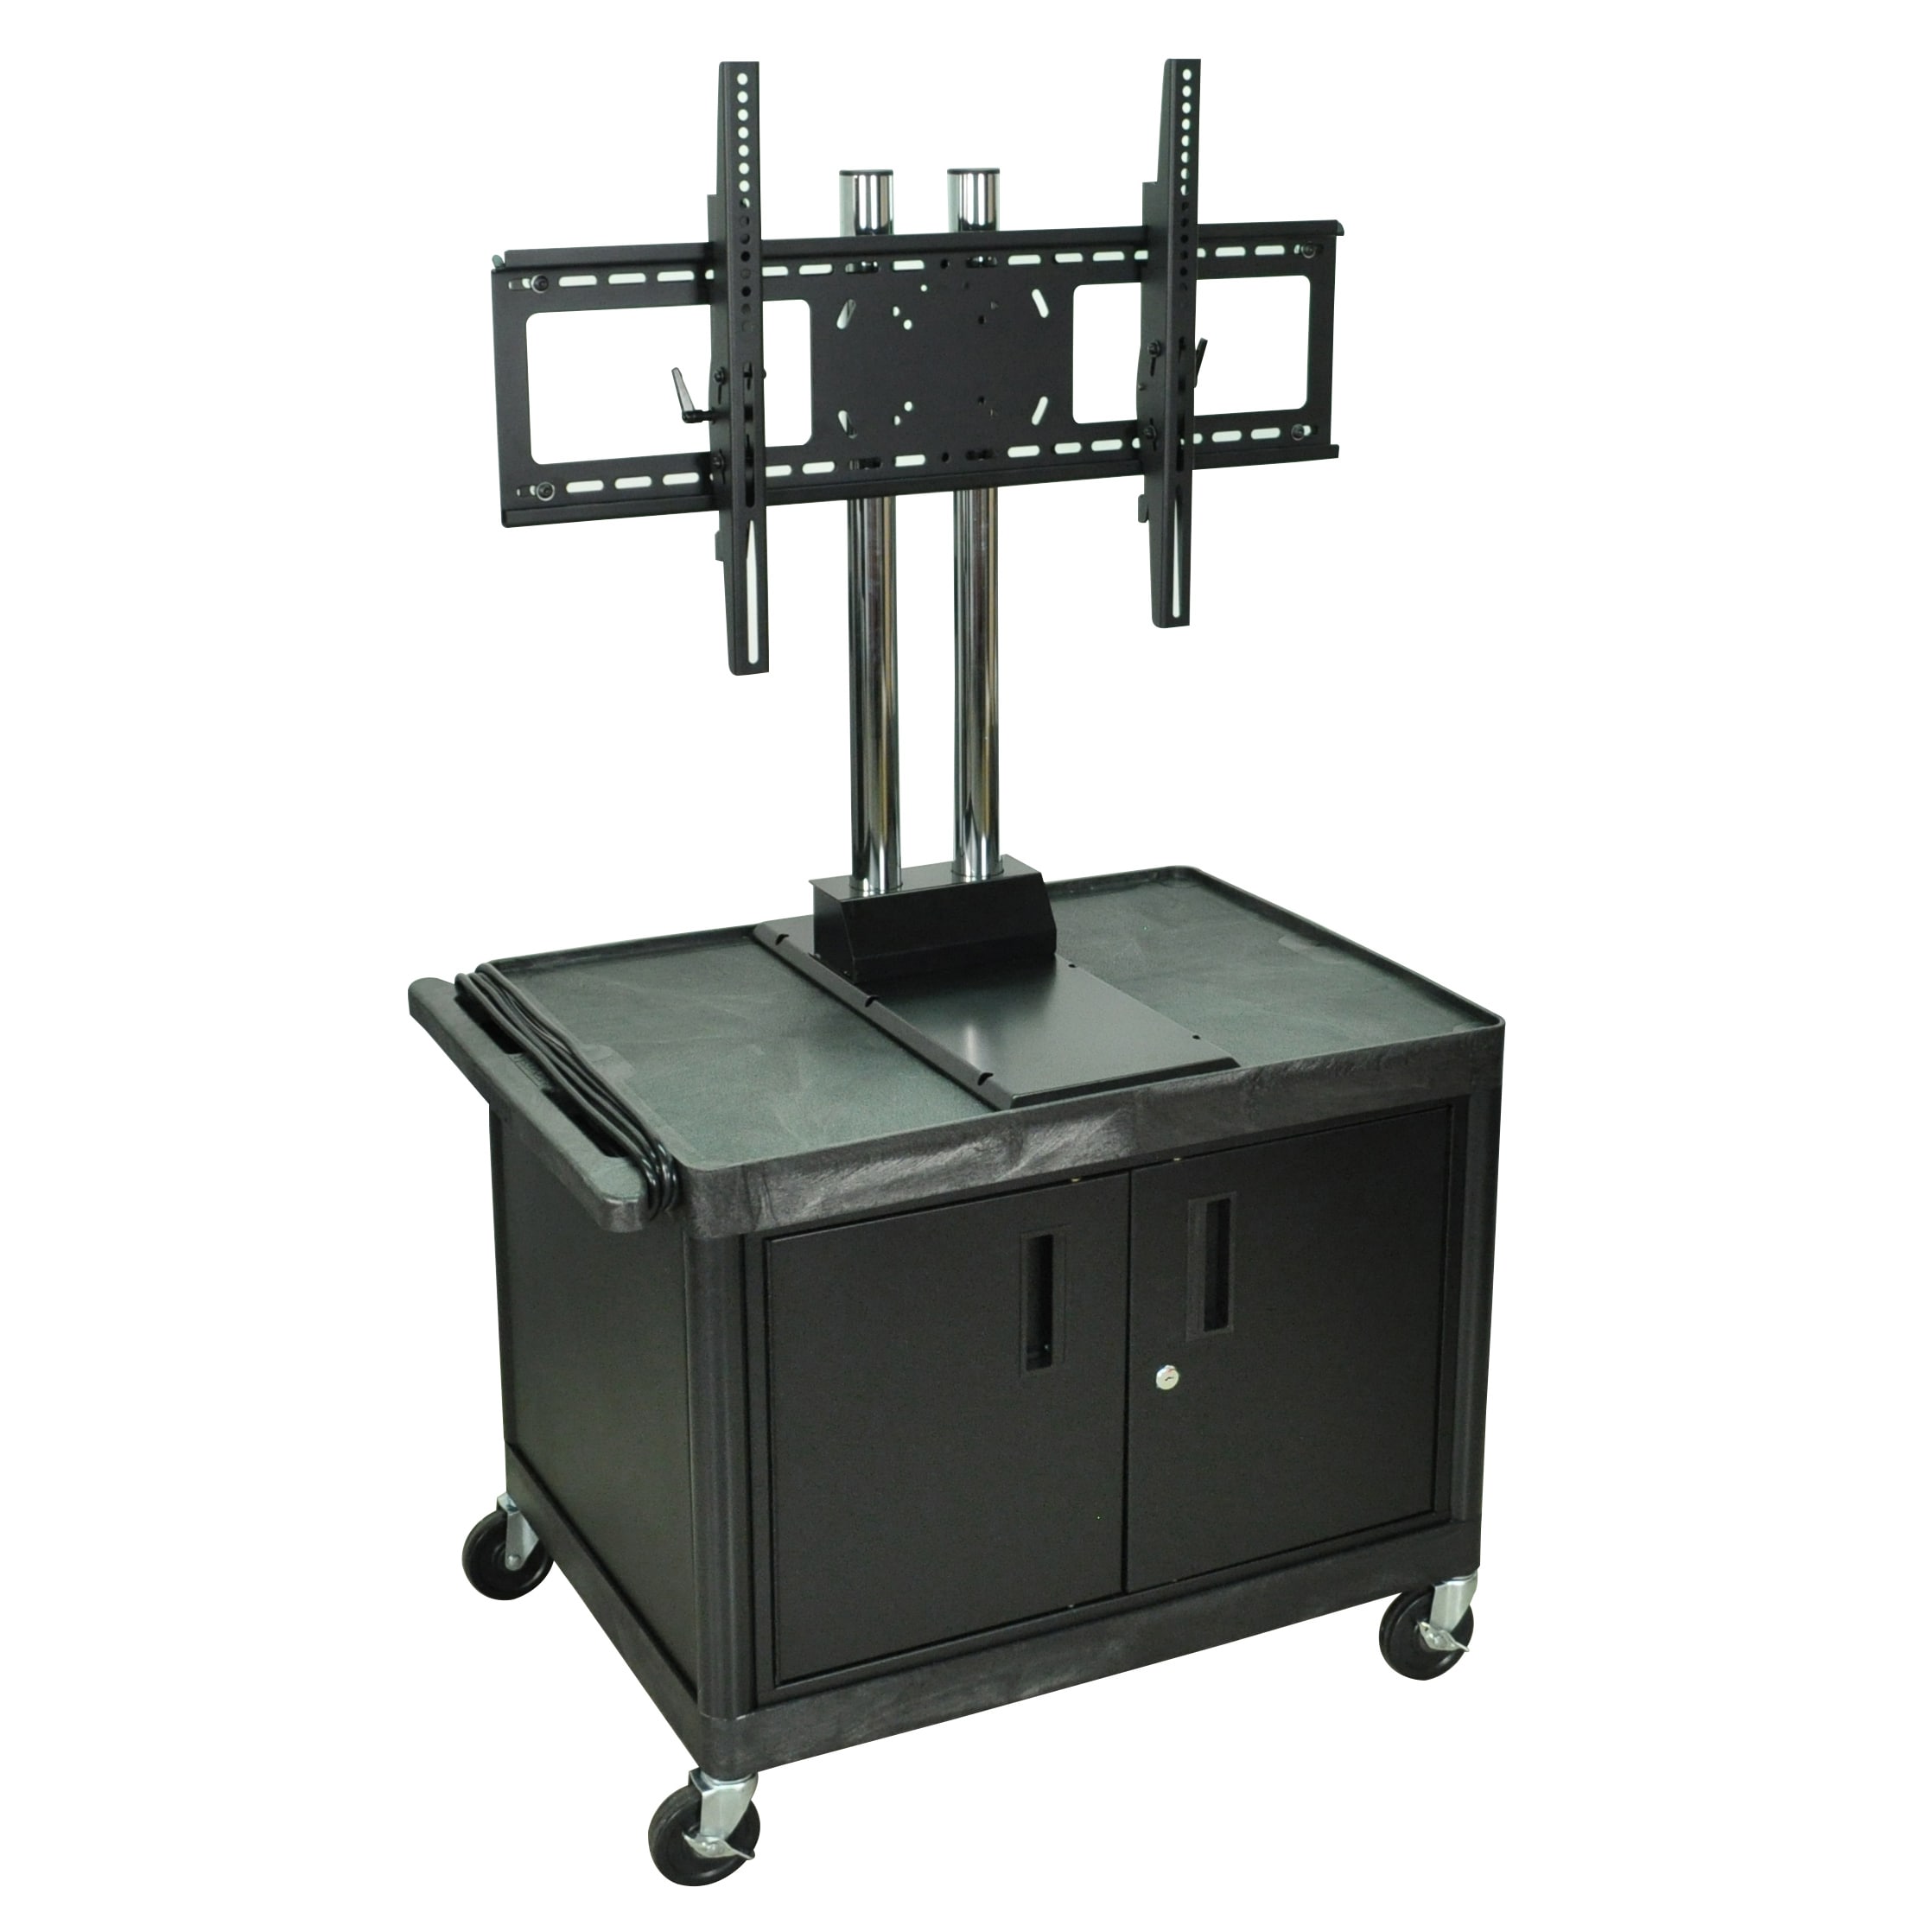 H.wilson Black Tuffy Mobile Video Cart With Cabinet And Flat Panel Mount (Black, silverMaterials Thermo plastic, steel, Dimensions 24 inches long x 32 inches wide x 45 inches highNumber of shelves Two(2)3 outlet UL listed electrical assembly with a 15 